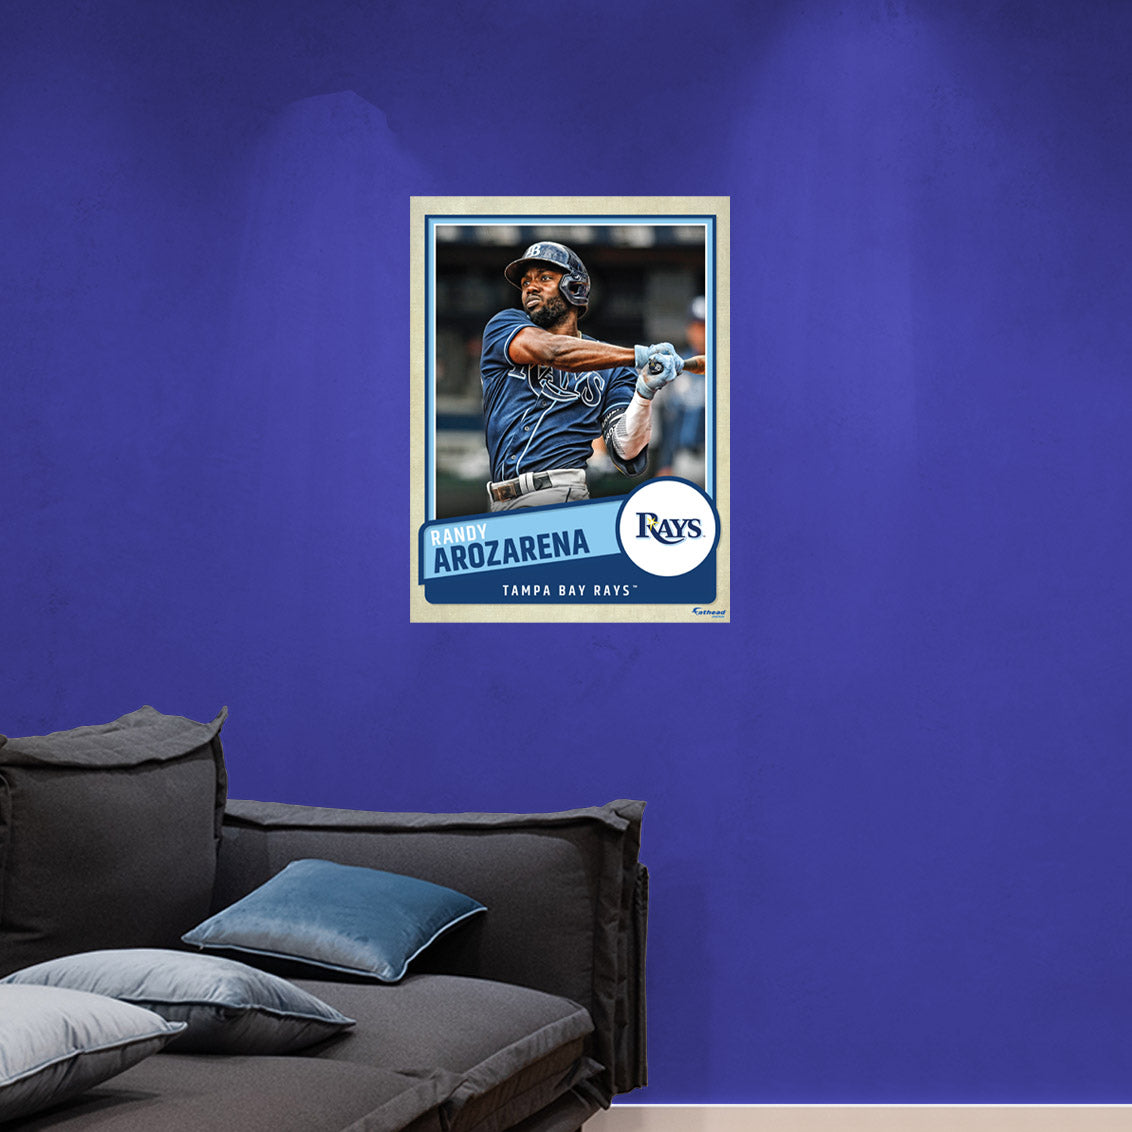 Tampa Bay Rays: Randy Arozarena  Poster        - Officially Licensed MLB Removable     Adhesive Decal